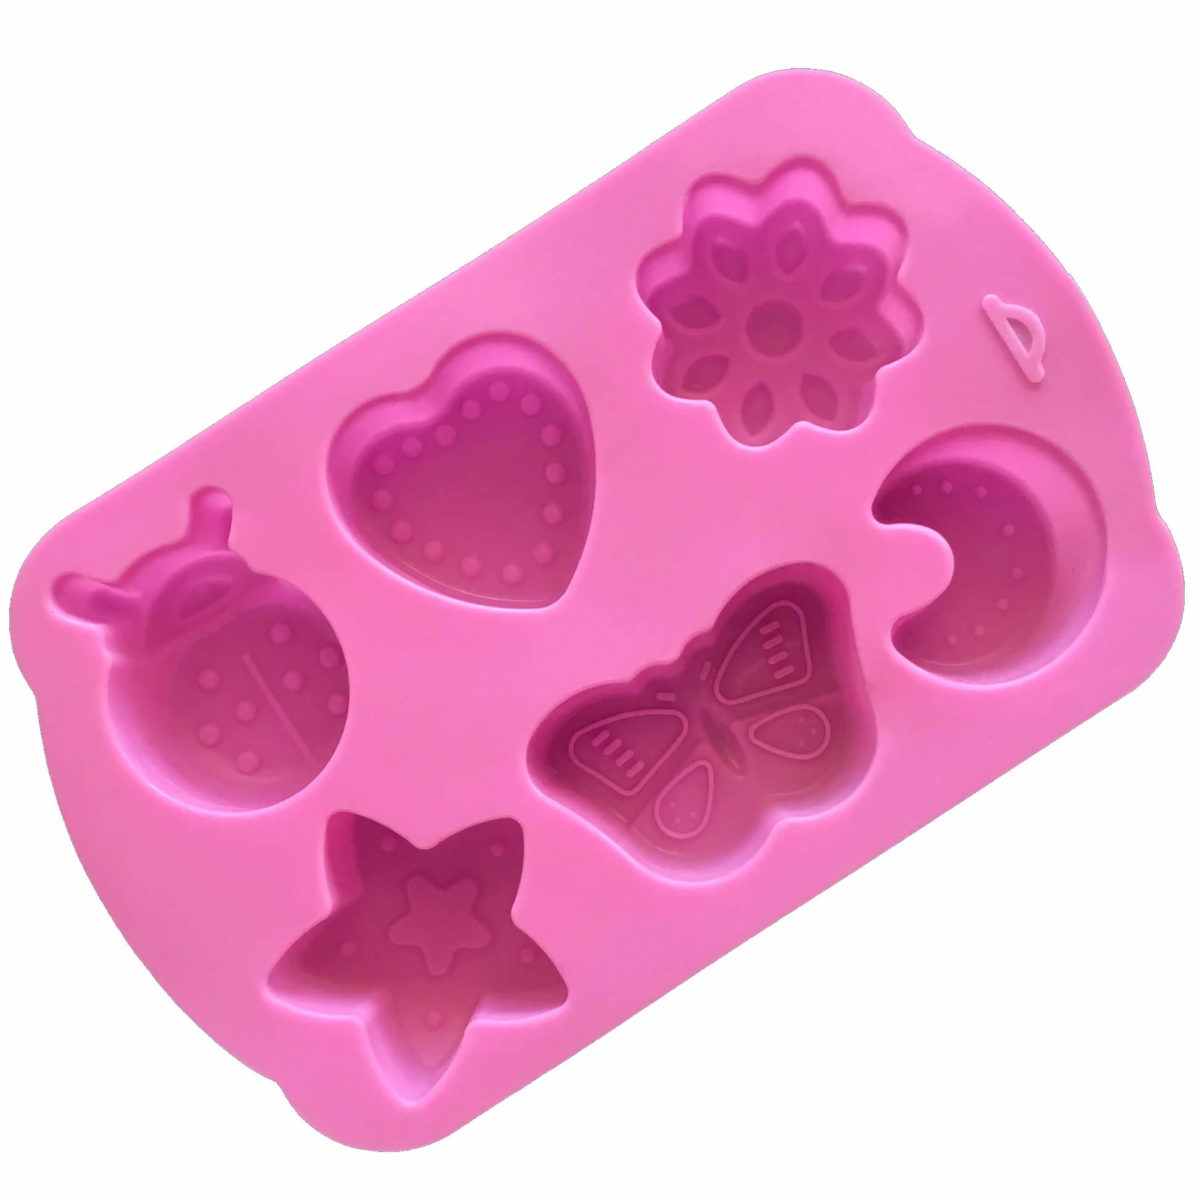 back of small pink silicone mould with six cavites - flower, heart, ladybug, moon, butterfly and star